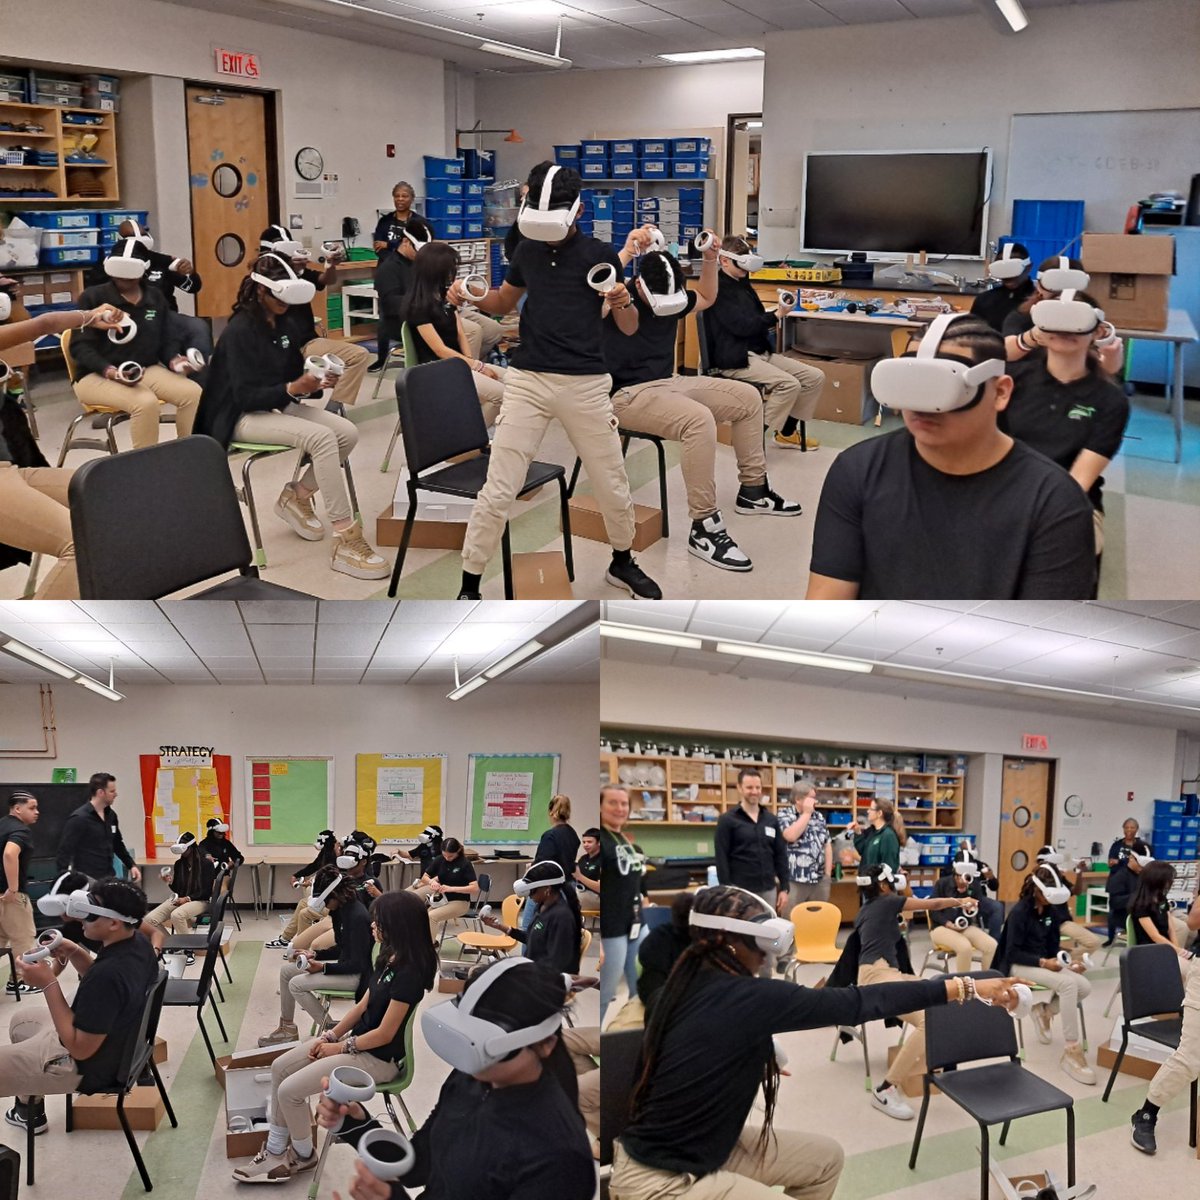 Our 8th graders LOVED their VR learning experience on Friday! Thank you to HPL and our district STEM coaches for this exciting opportunity! We can't wait to continue these experiences this year! @STEMEdCT @Hartford_Public @msboratko @corinne_barney @Hartford_Public @HPLCT